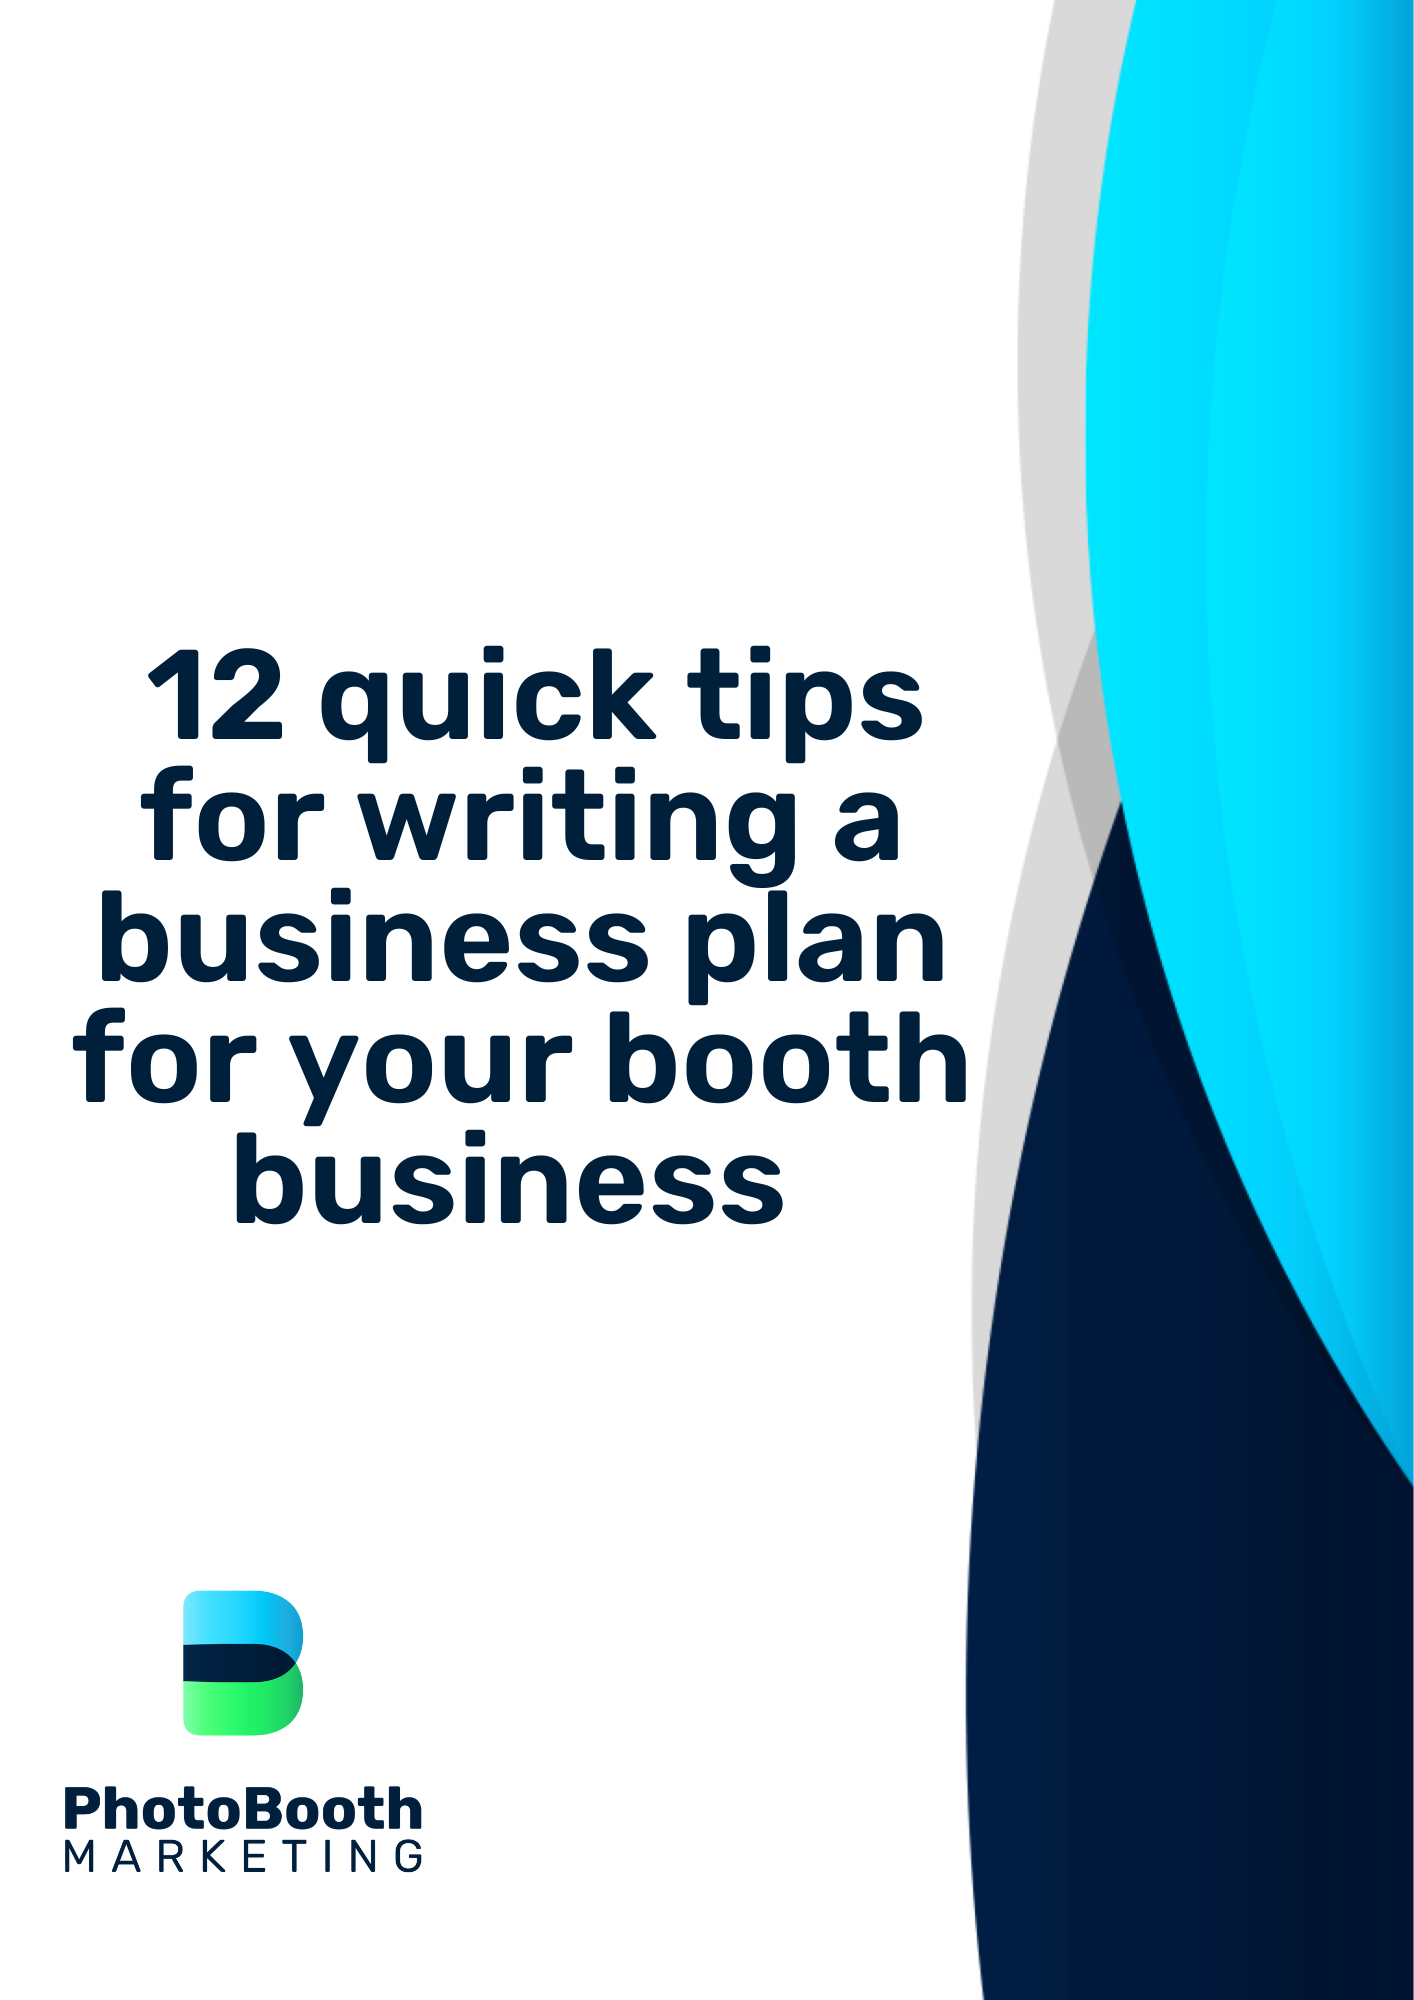 90 Days to Kick Start Your Marketing WK1: 12 Tips For Writing a Business Plan for your Booth Business